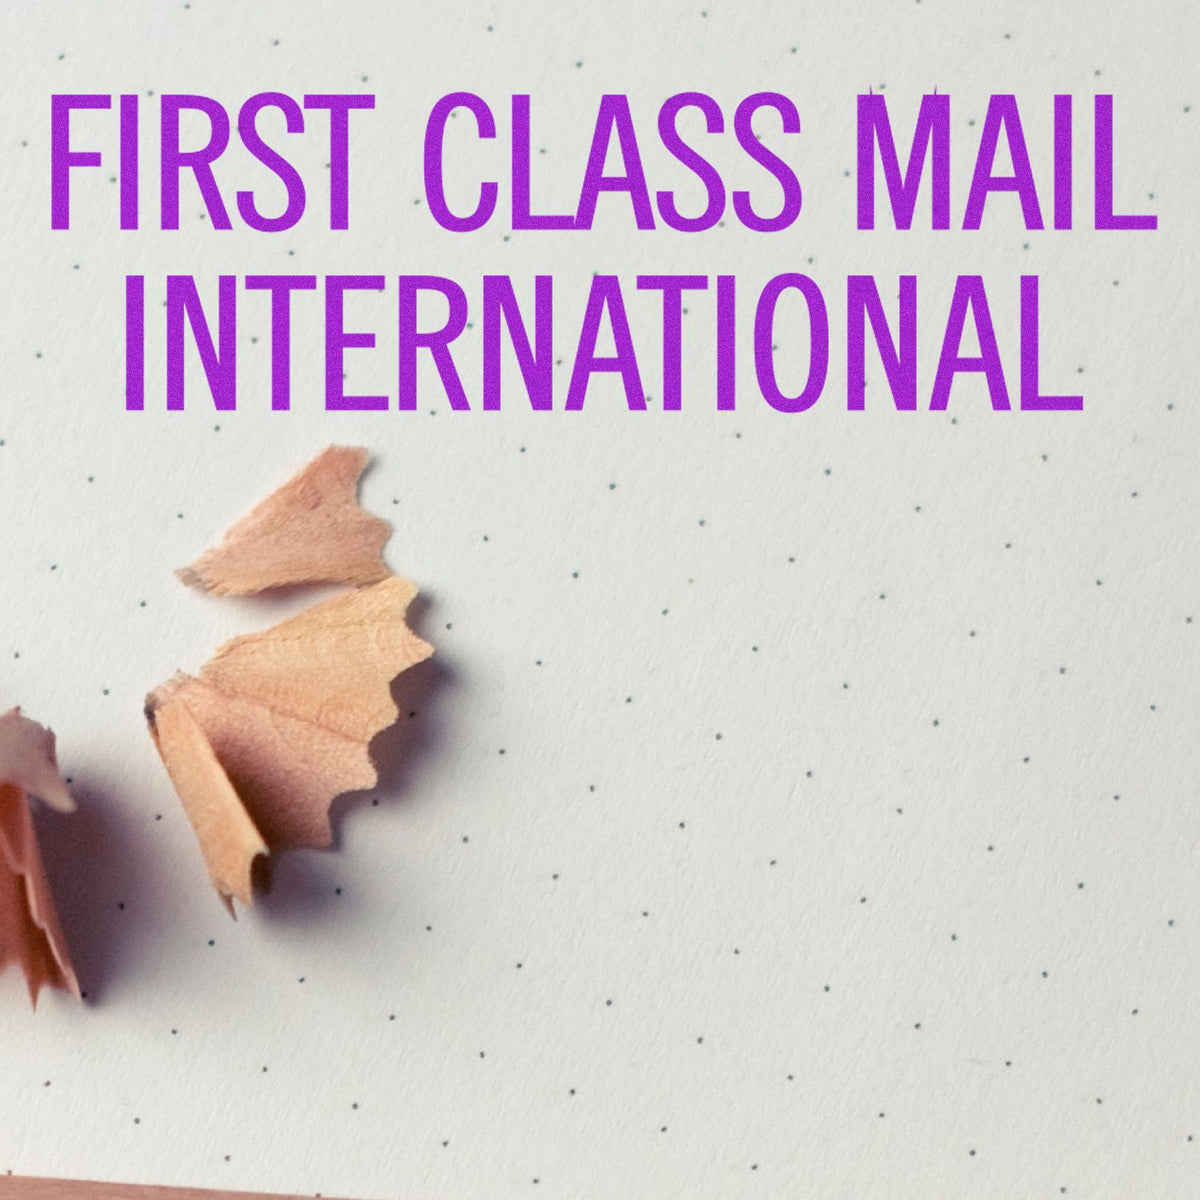 First Class Mail International Rubber Stamp In Use